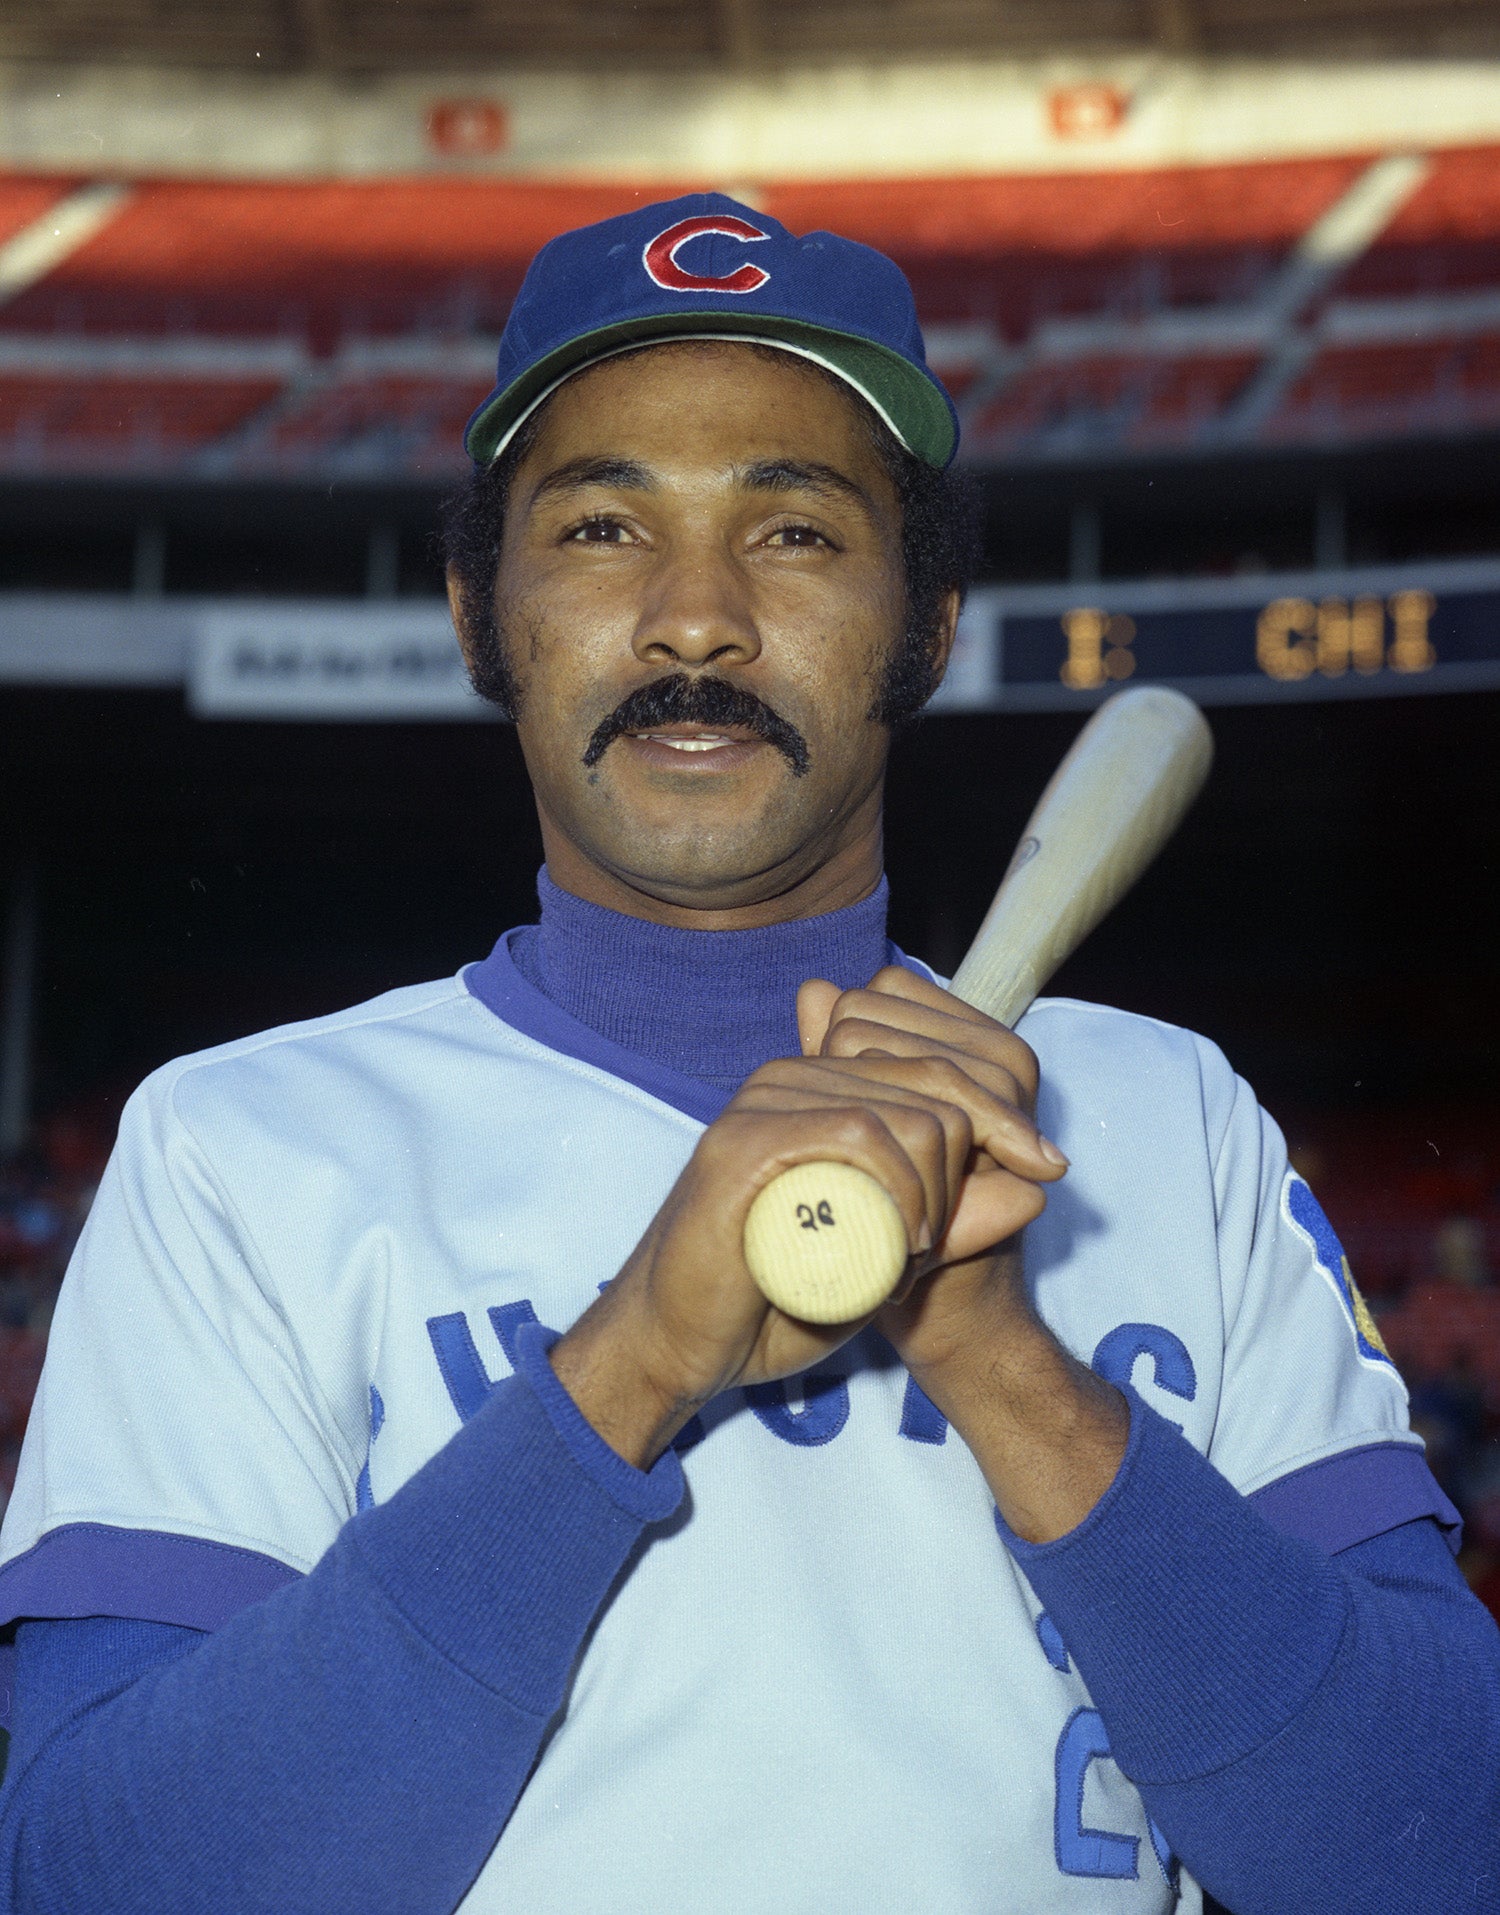 Loveable Cub: Billy Williams parlayed a textbook swing and unwavering consistency into a plaque in Cooperstown 